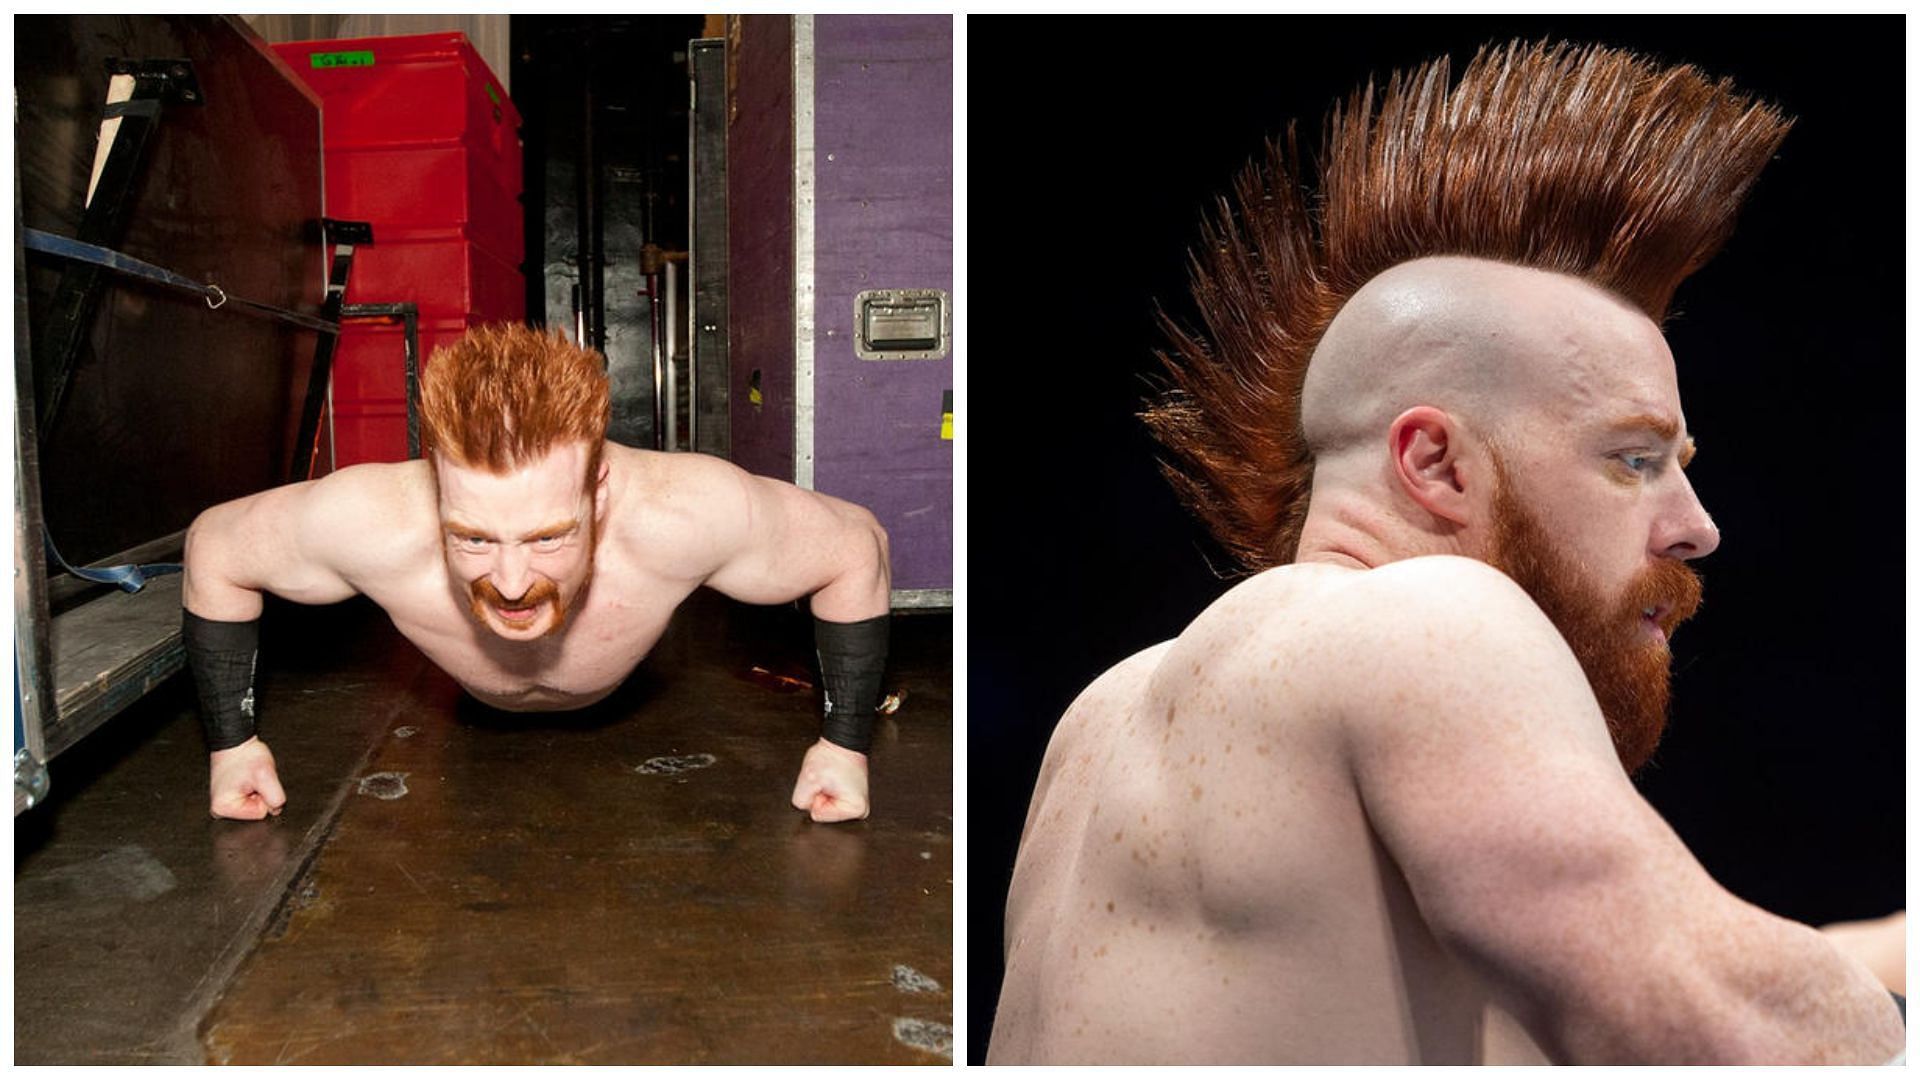 Sheamus is a former WWE Champion.